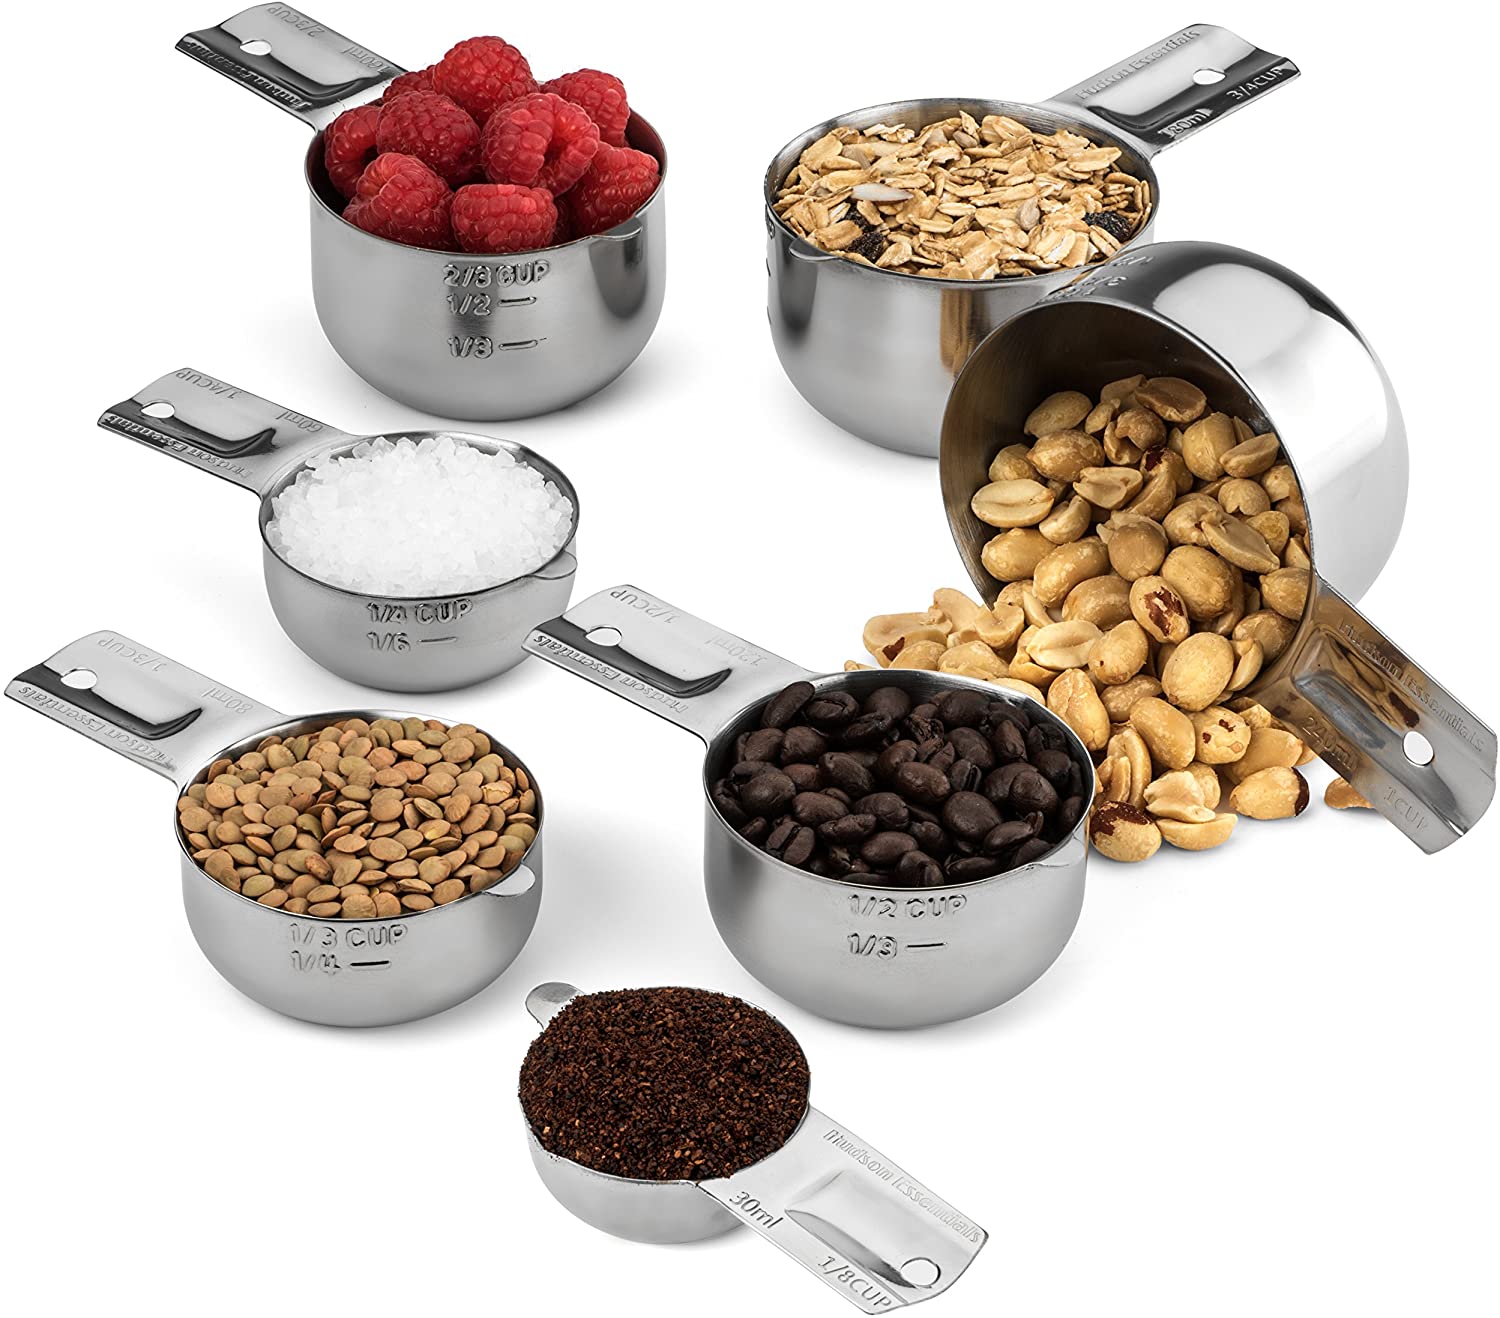 Hudson Essentials Stainless Steel Measuring Cup Set 